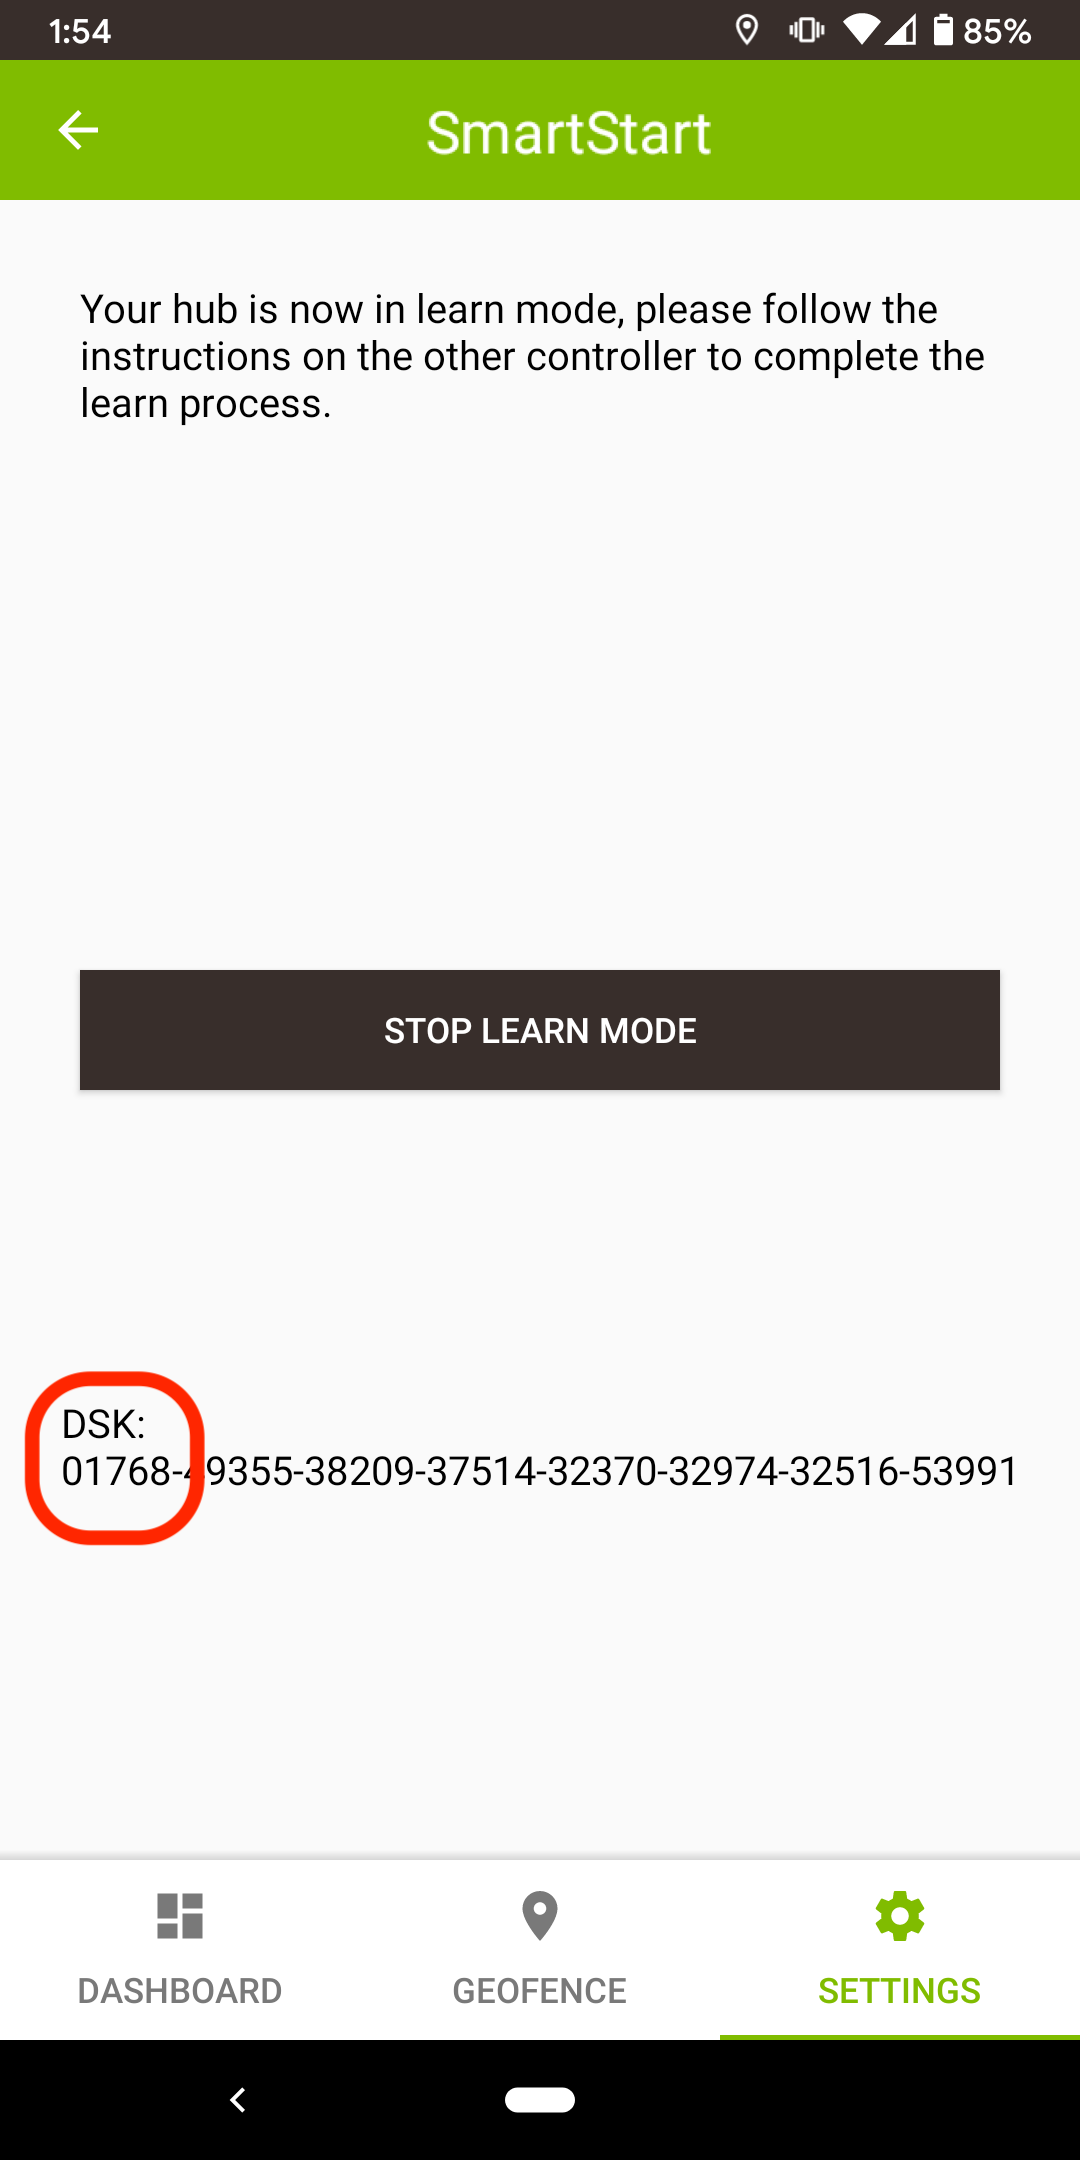 Screenshot: "Stop Learn Mode" button and DSK